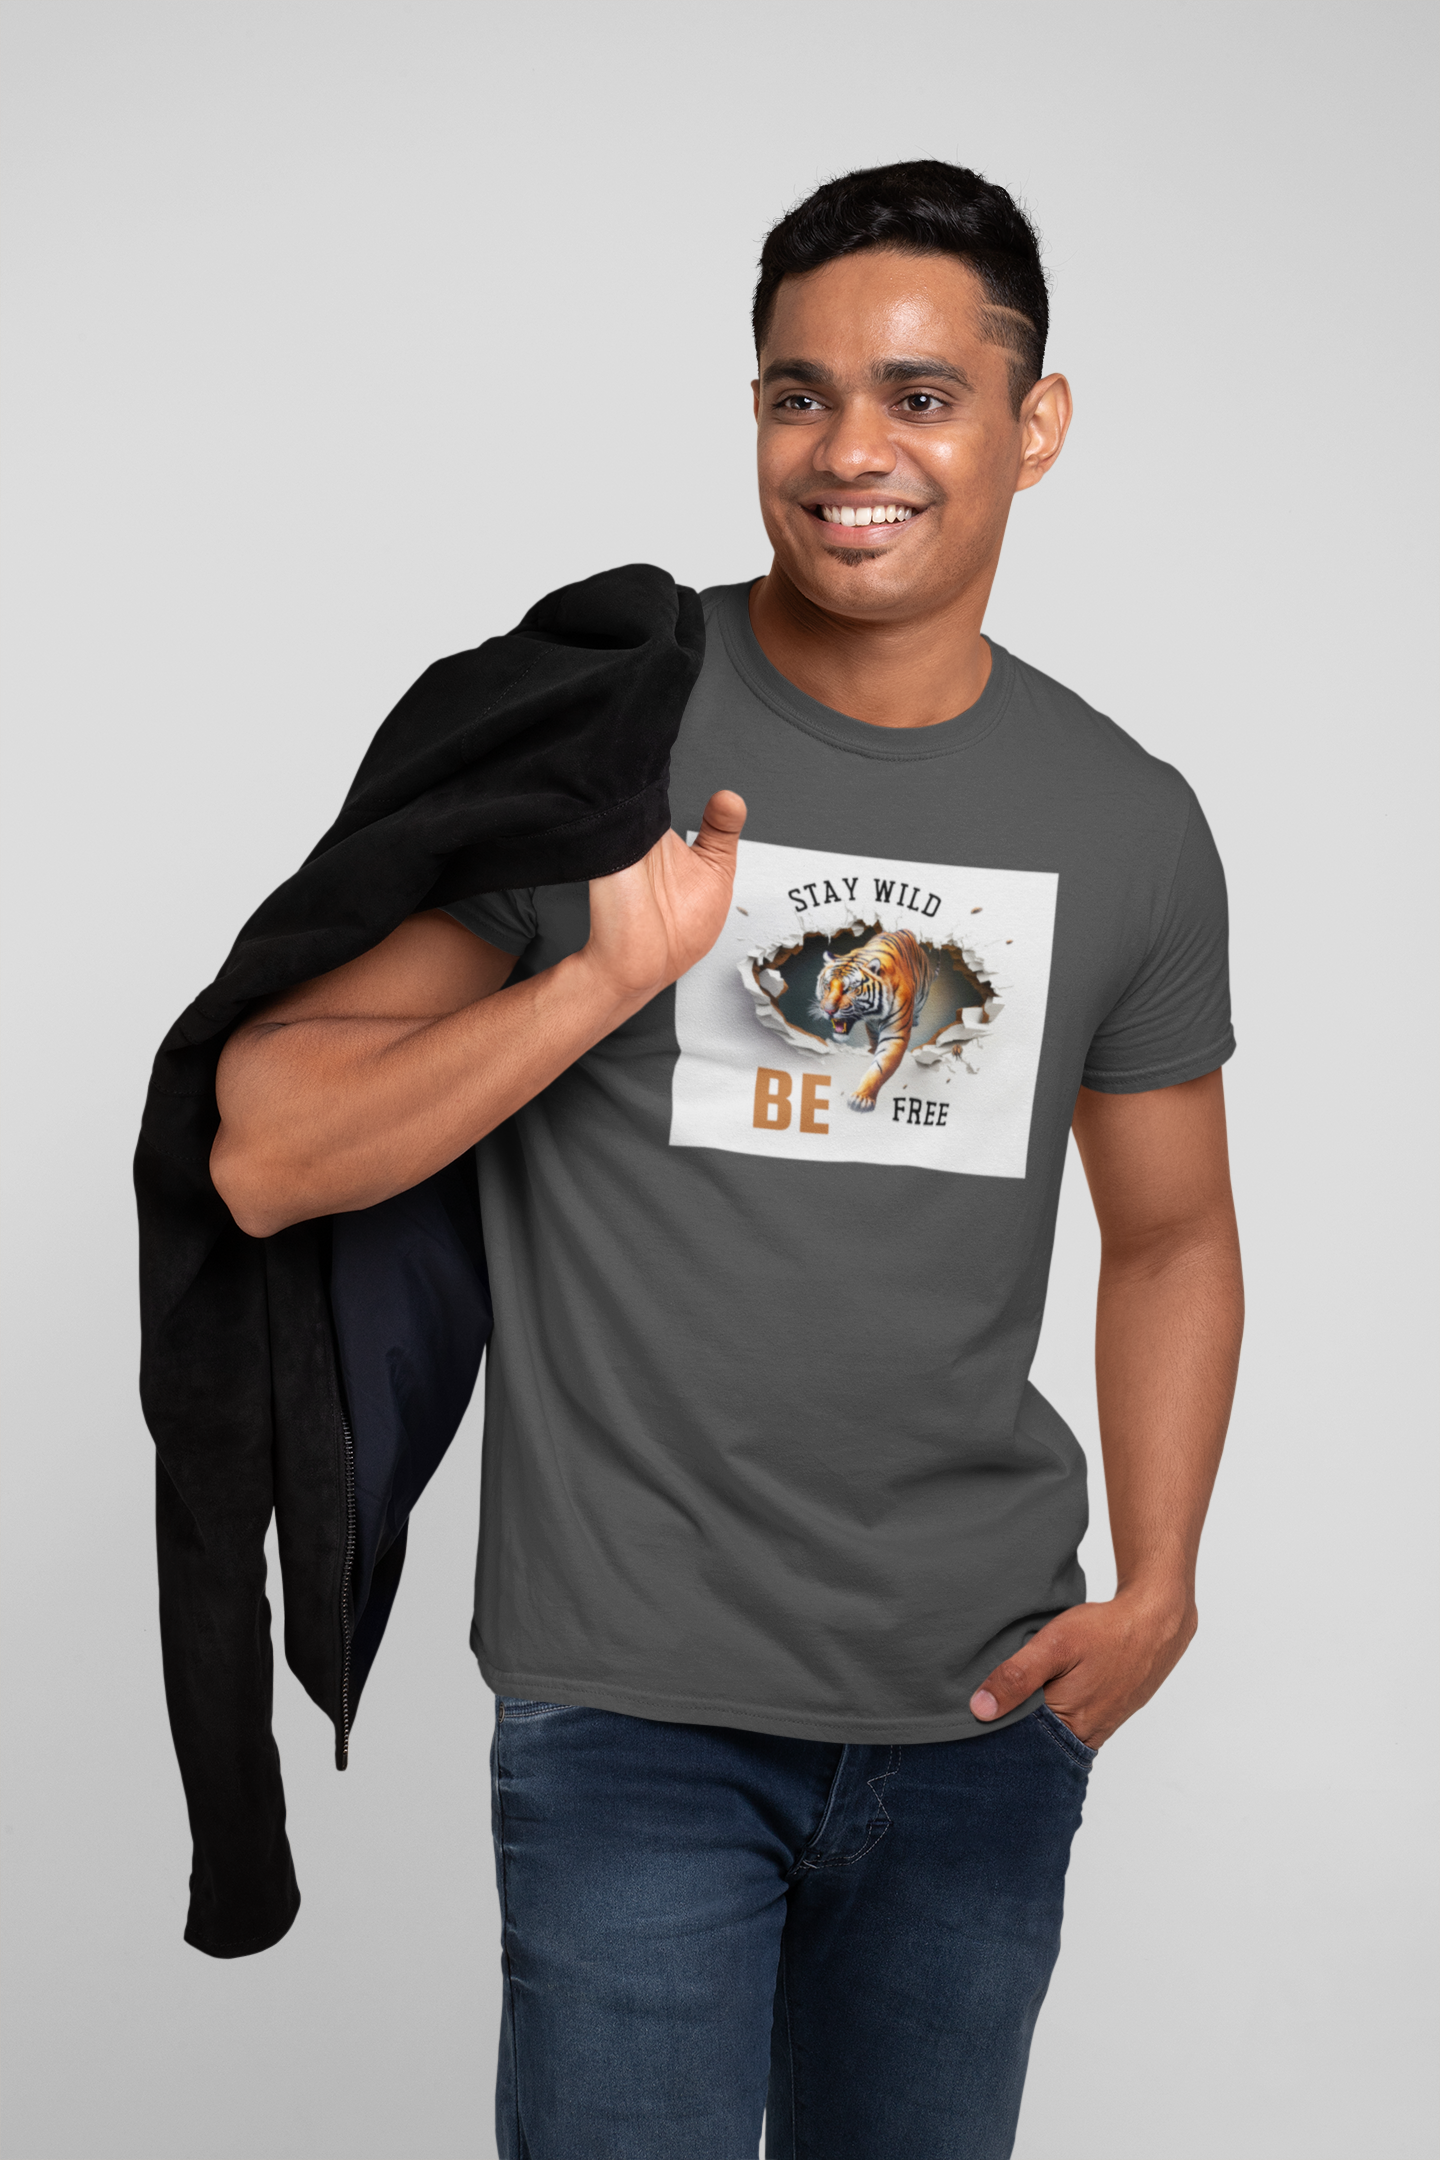 Stay Wild Be Free - Comfortable Cotton T-shirt for a Casual and Stylish Look